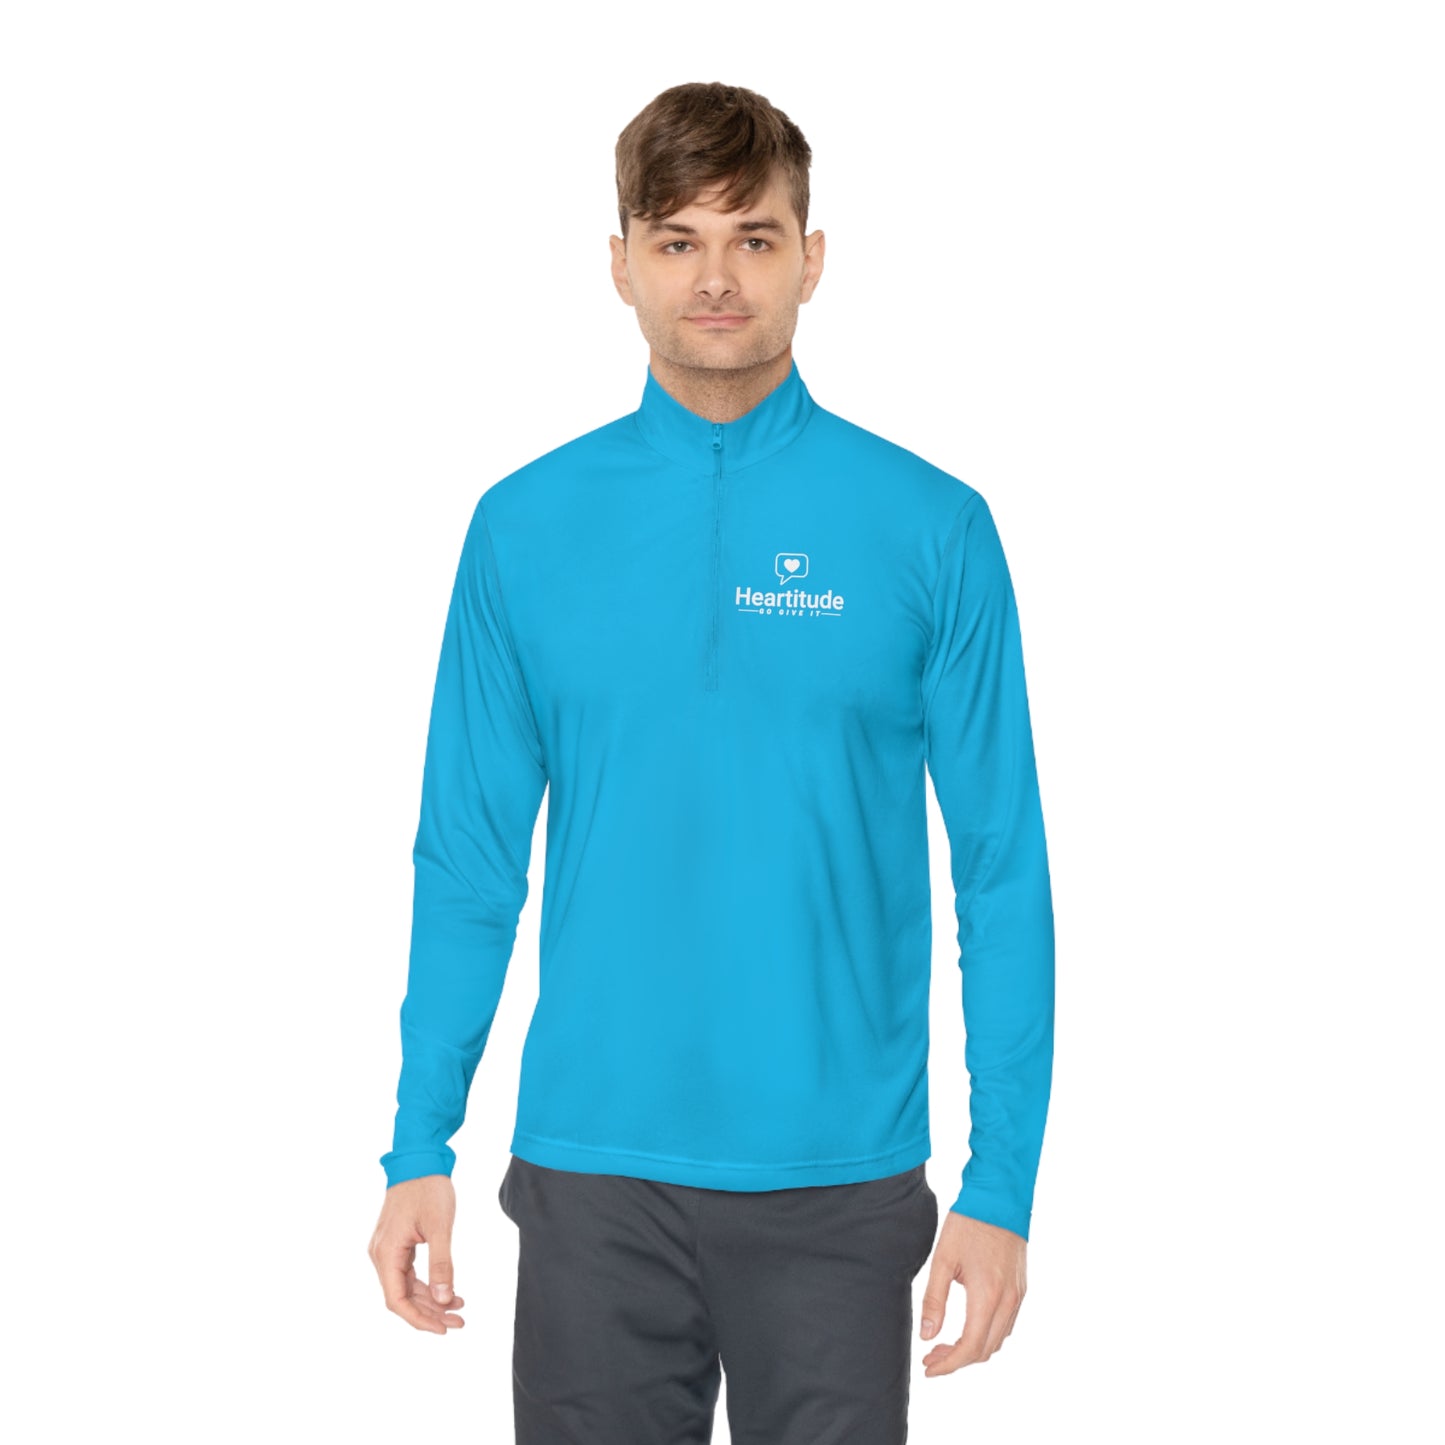 Heartitude Unisex Quarter-Zip Pullover (50% to charity)